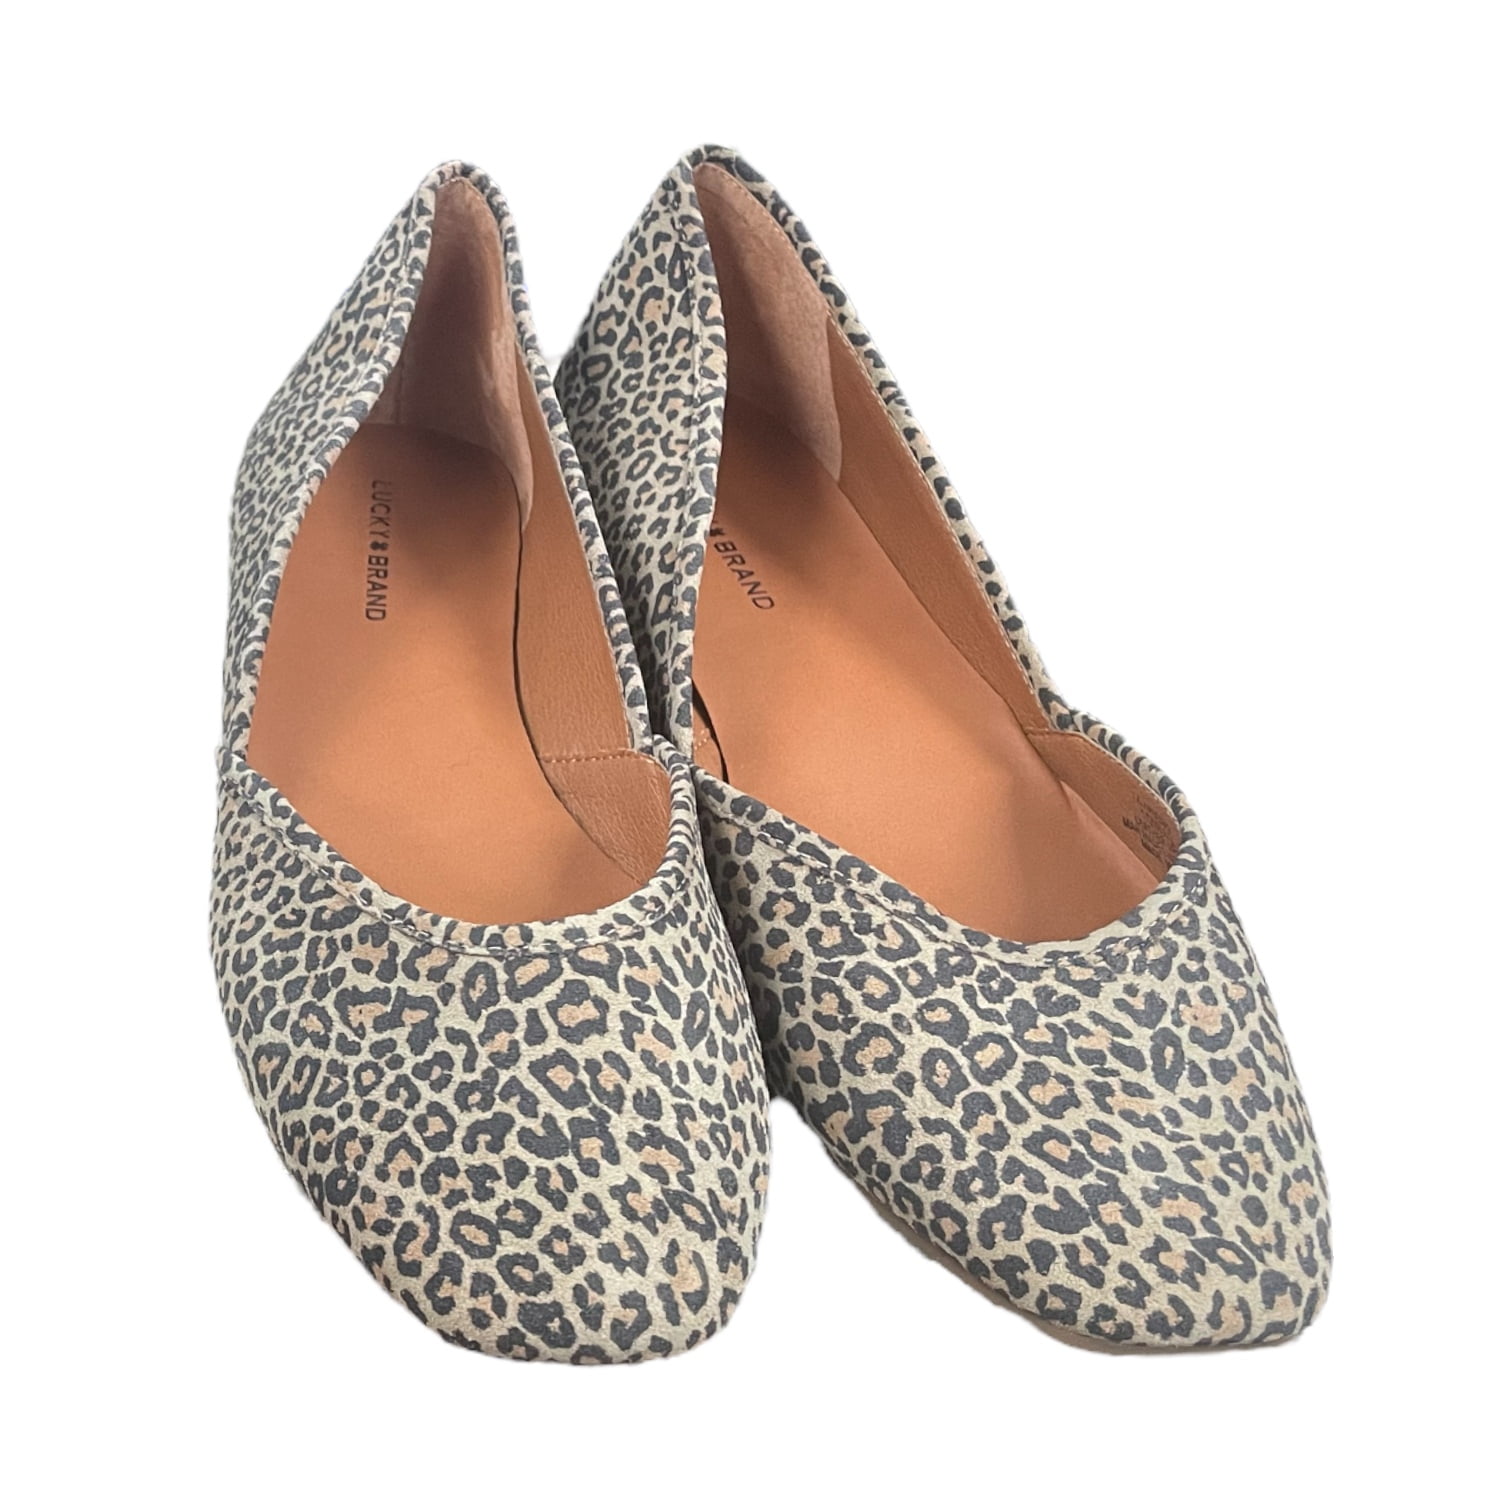 Lucky Brand Women's Casual Fashion Ameena Flats (Leopard, 8.5) 